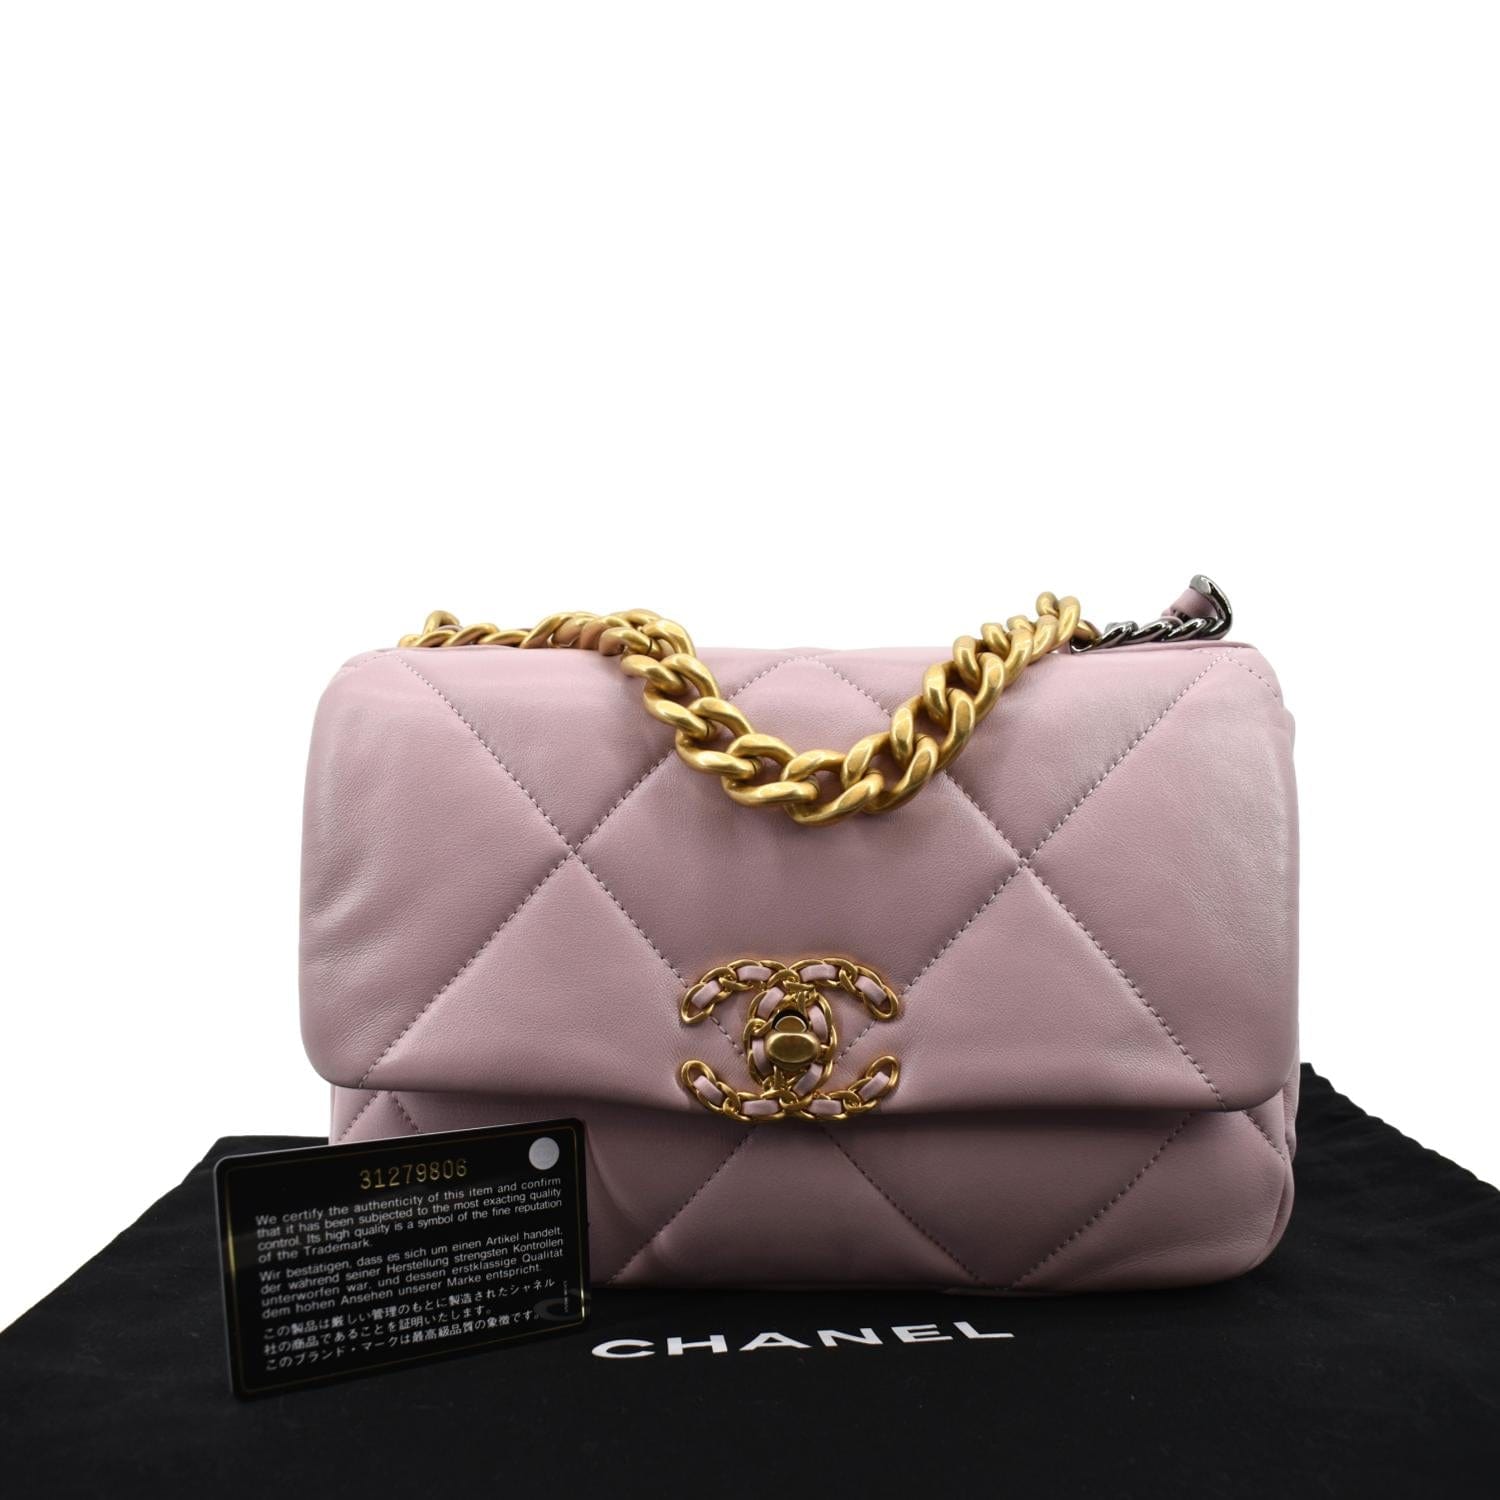 Chanel 19 leather handbag Chanel Pink in Leather - 35946522